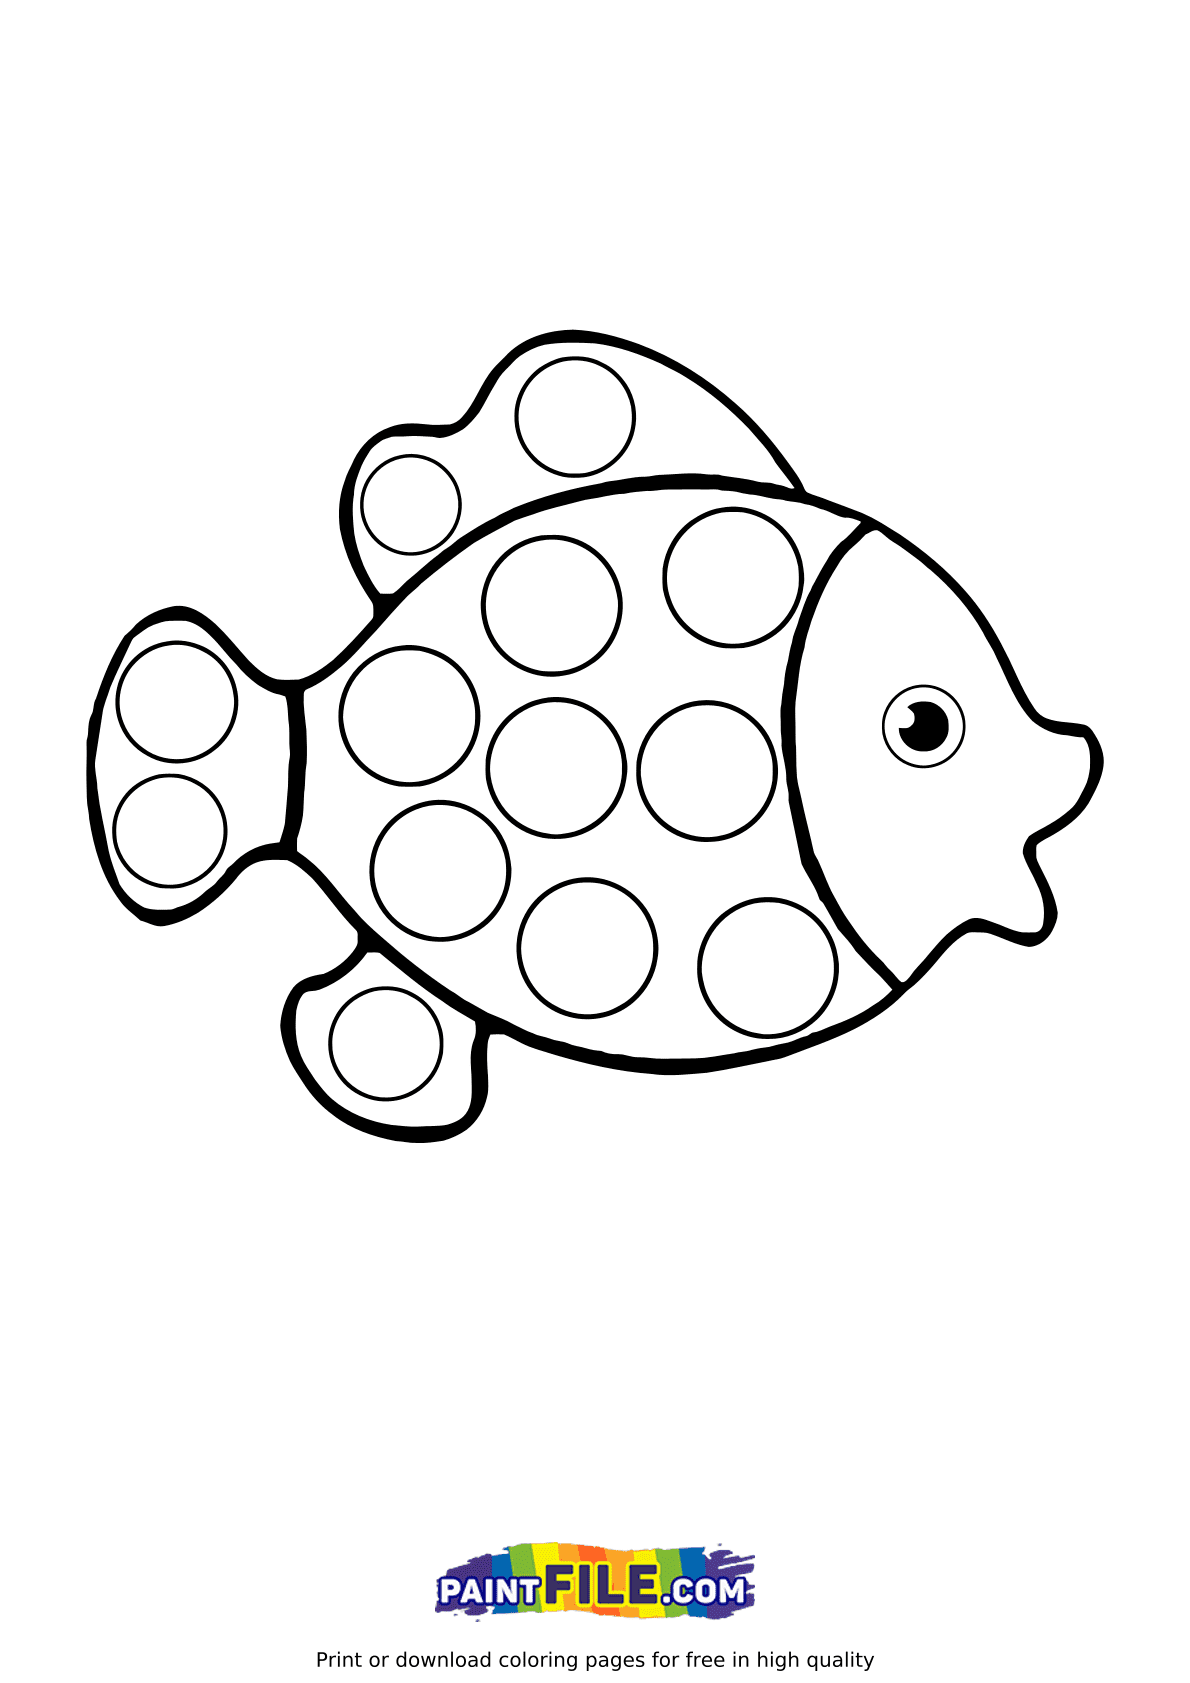 Pop it Gold Fish Coloring Page